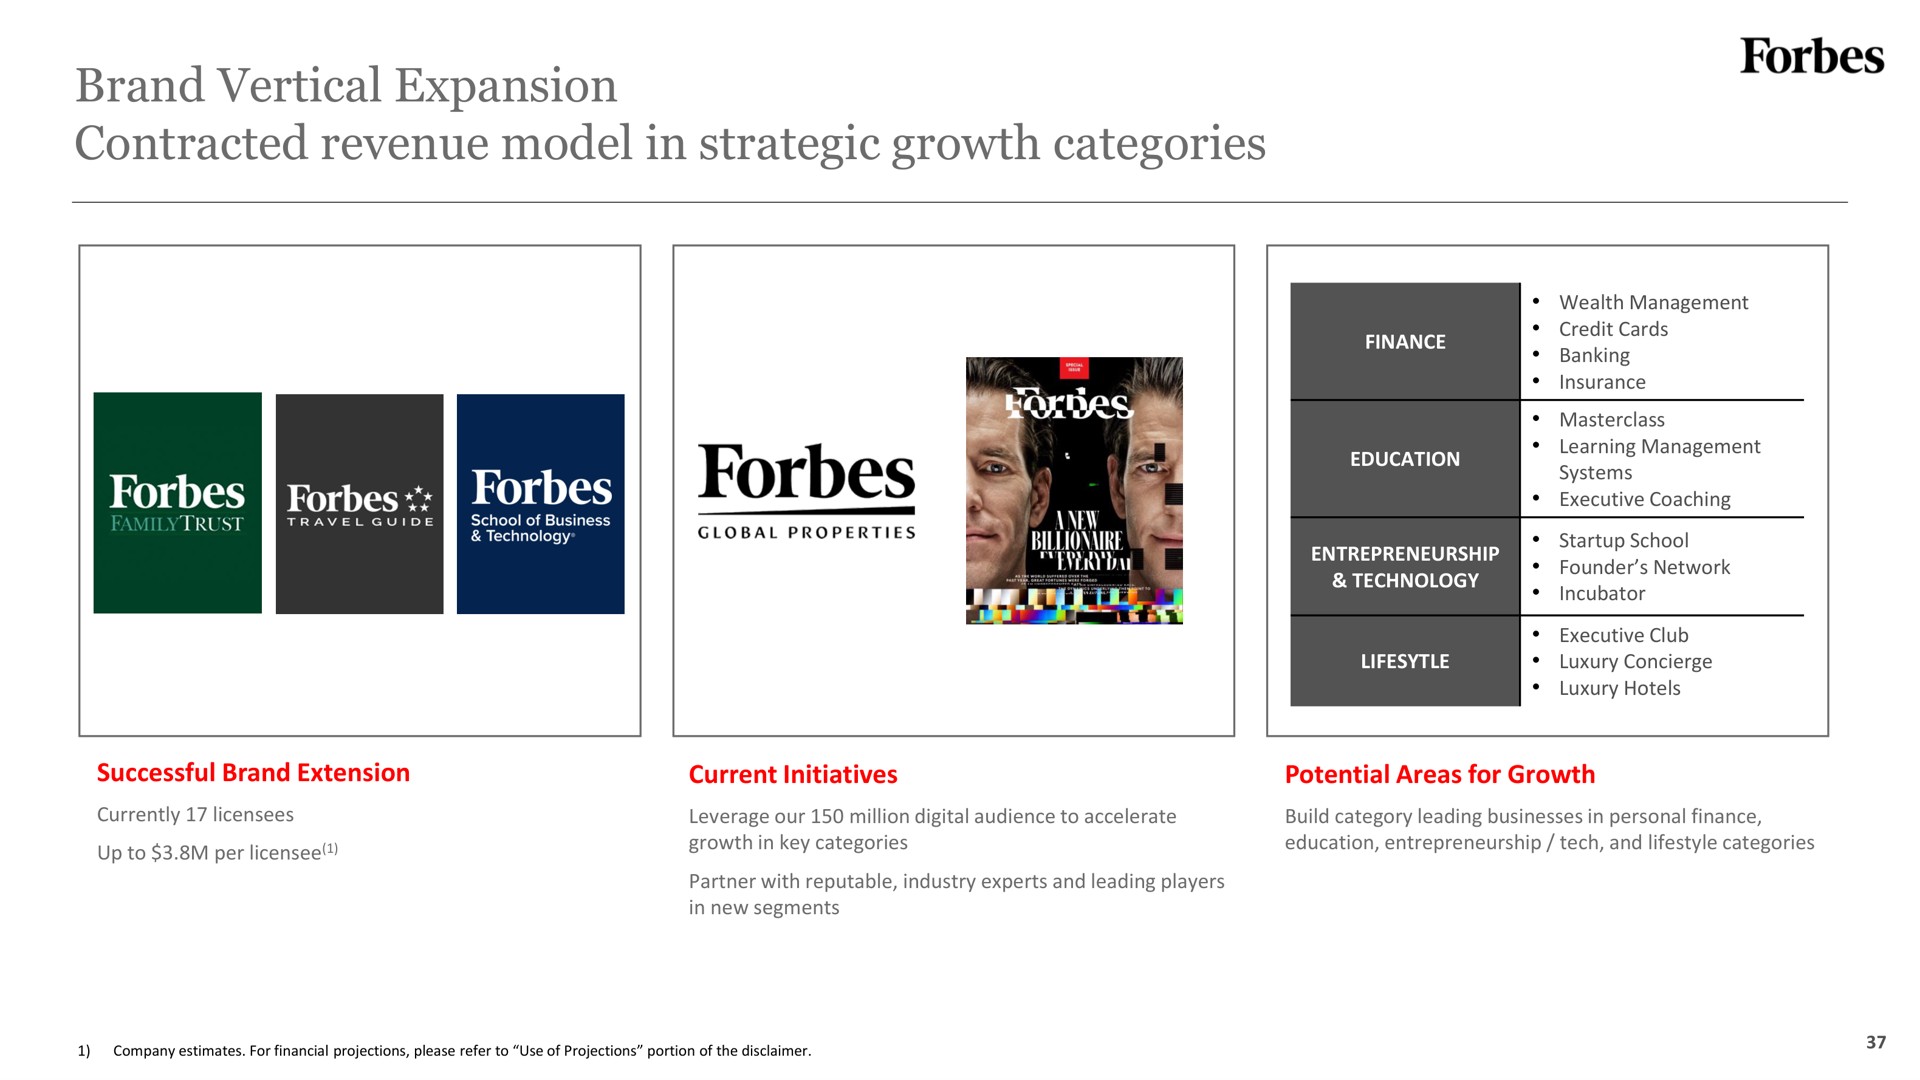 brand vertical expansion contracted revenue model in strategic growth categories | Forbes